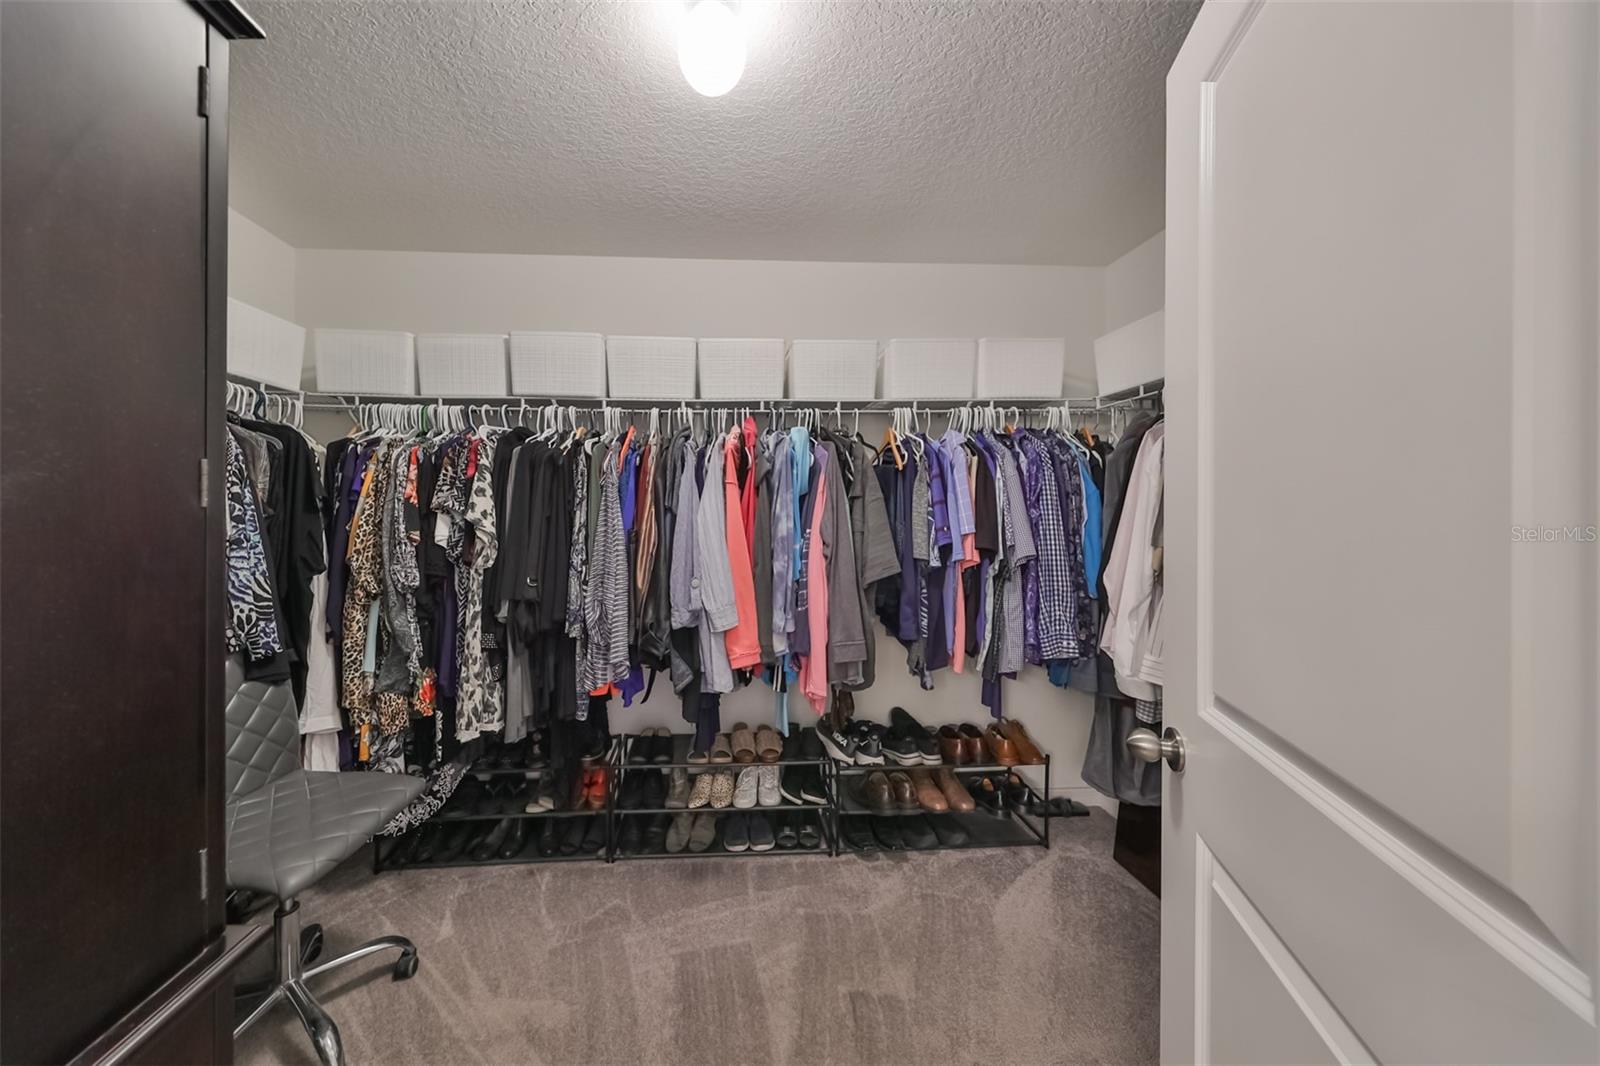 Plenty of closet space for him and her!